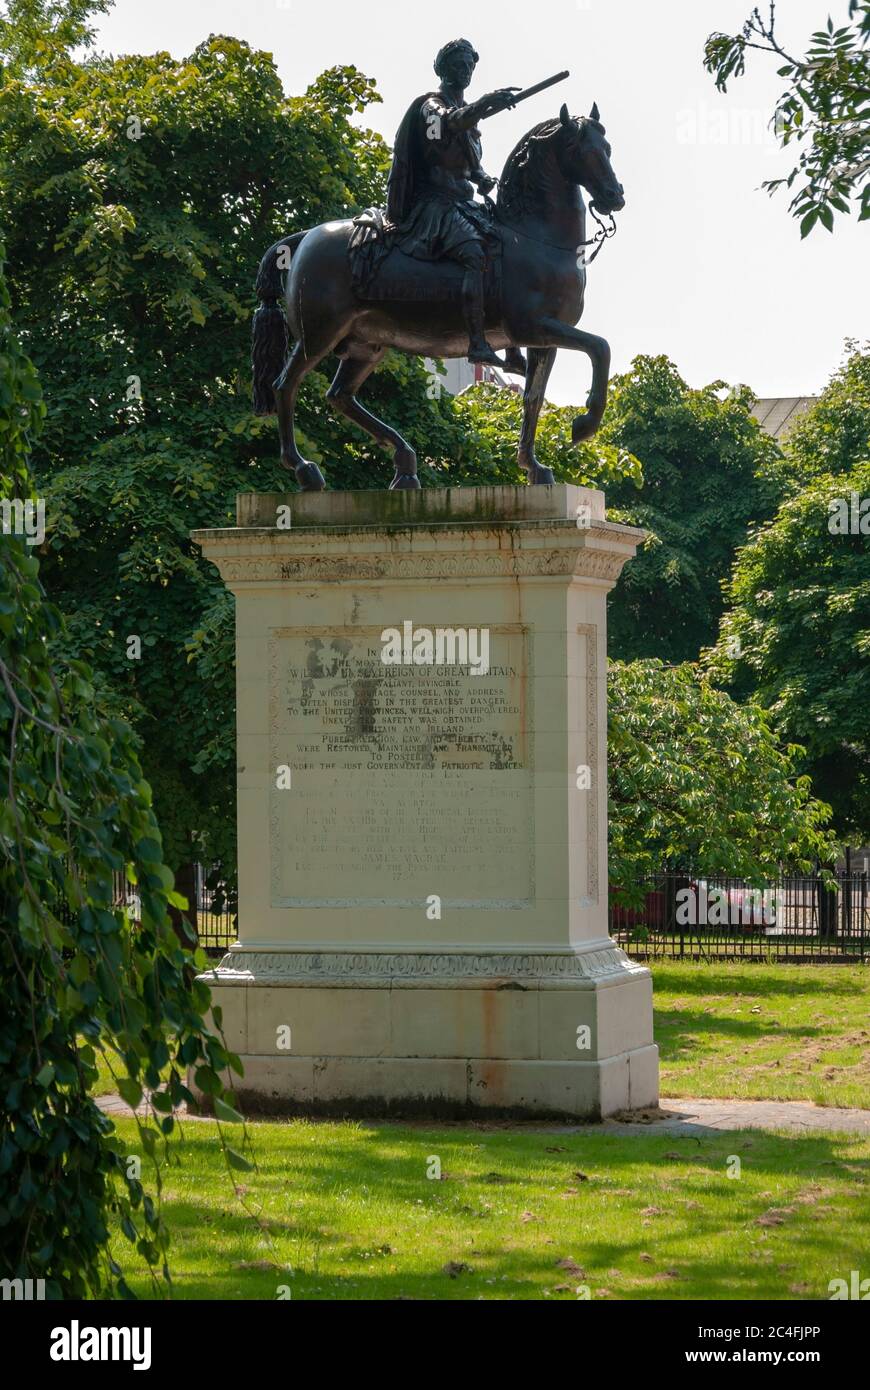 King William Billy of Orange On a Horse Statue Glasgow Scotland United Kingdom portrait view of the right side of 1735 bronze metal equestrian statue Stock Photo